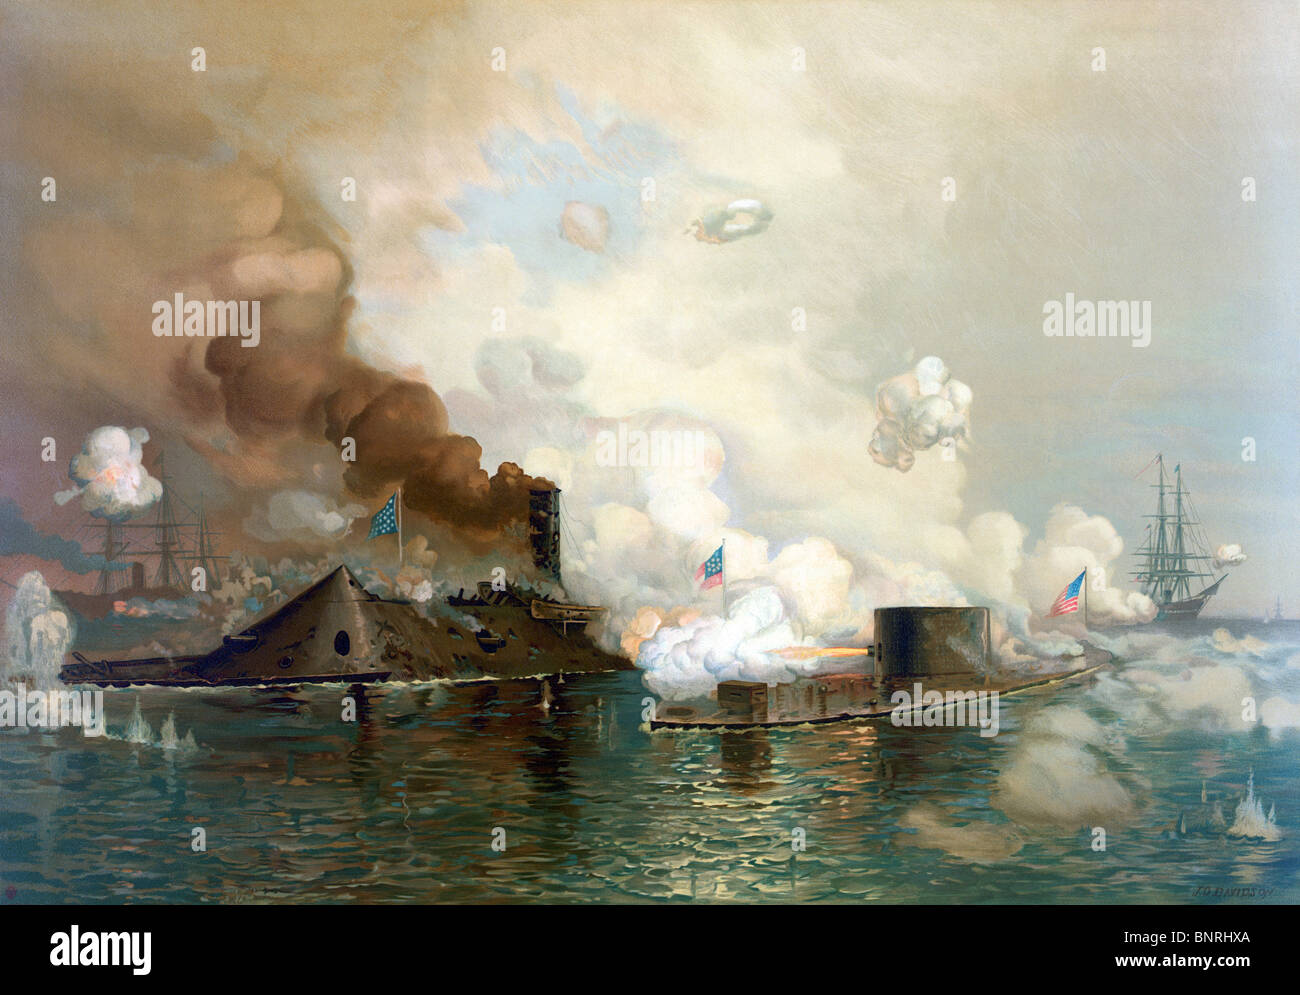 Vintage print depicting the Battle of the Monitor and Merrimack in the US Civil War - first ever naval battle between ironclads. Stock Photo